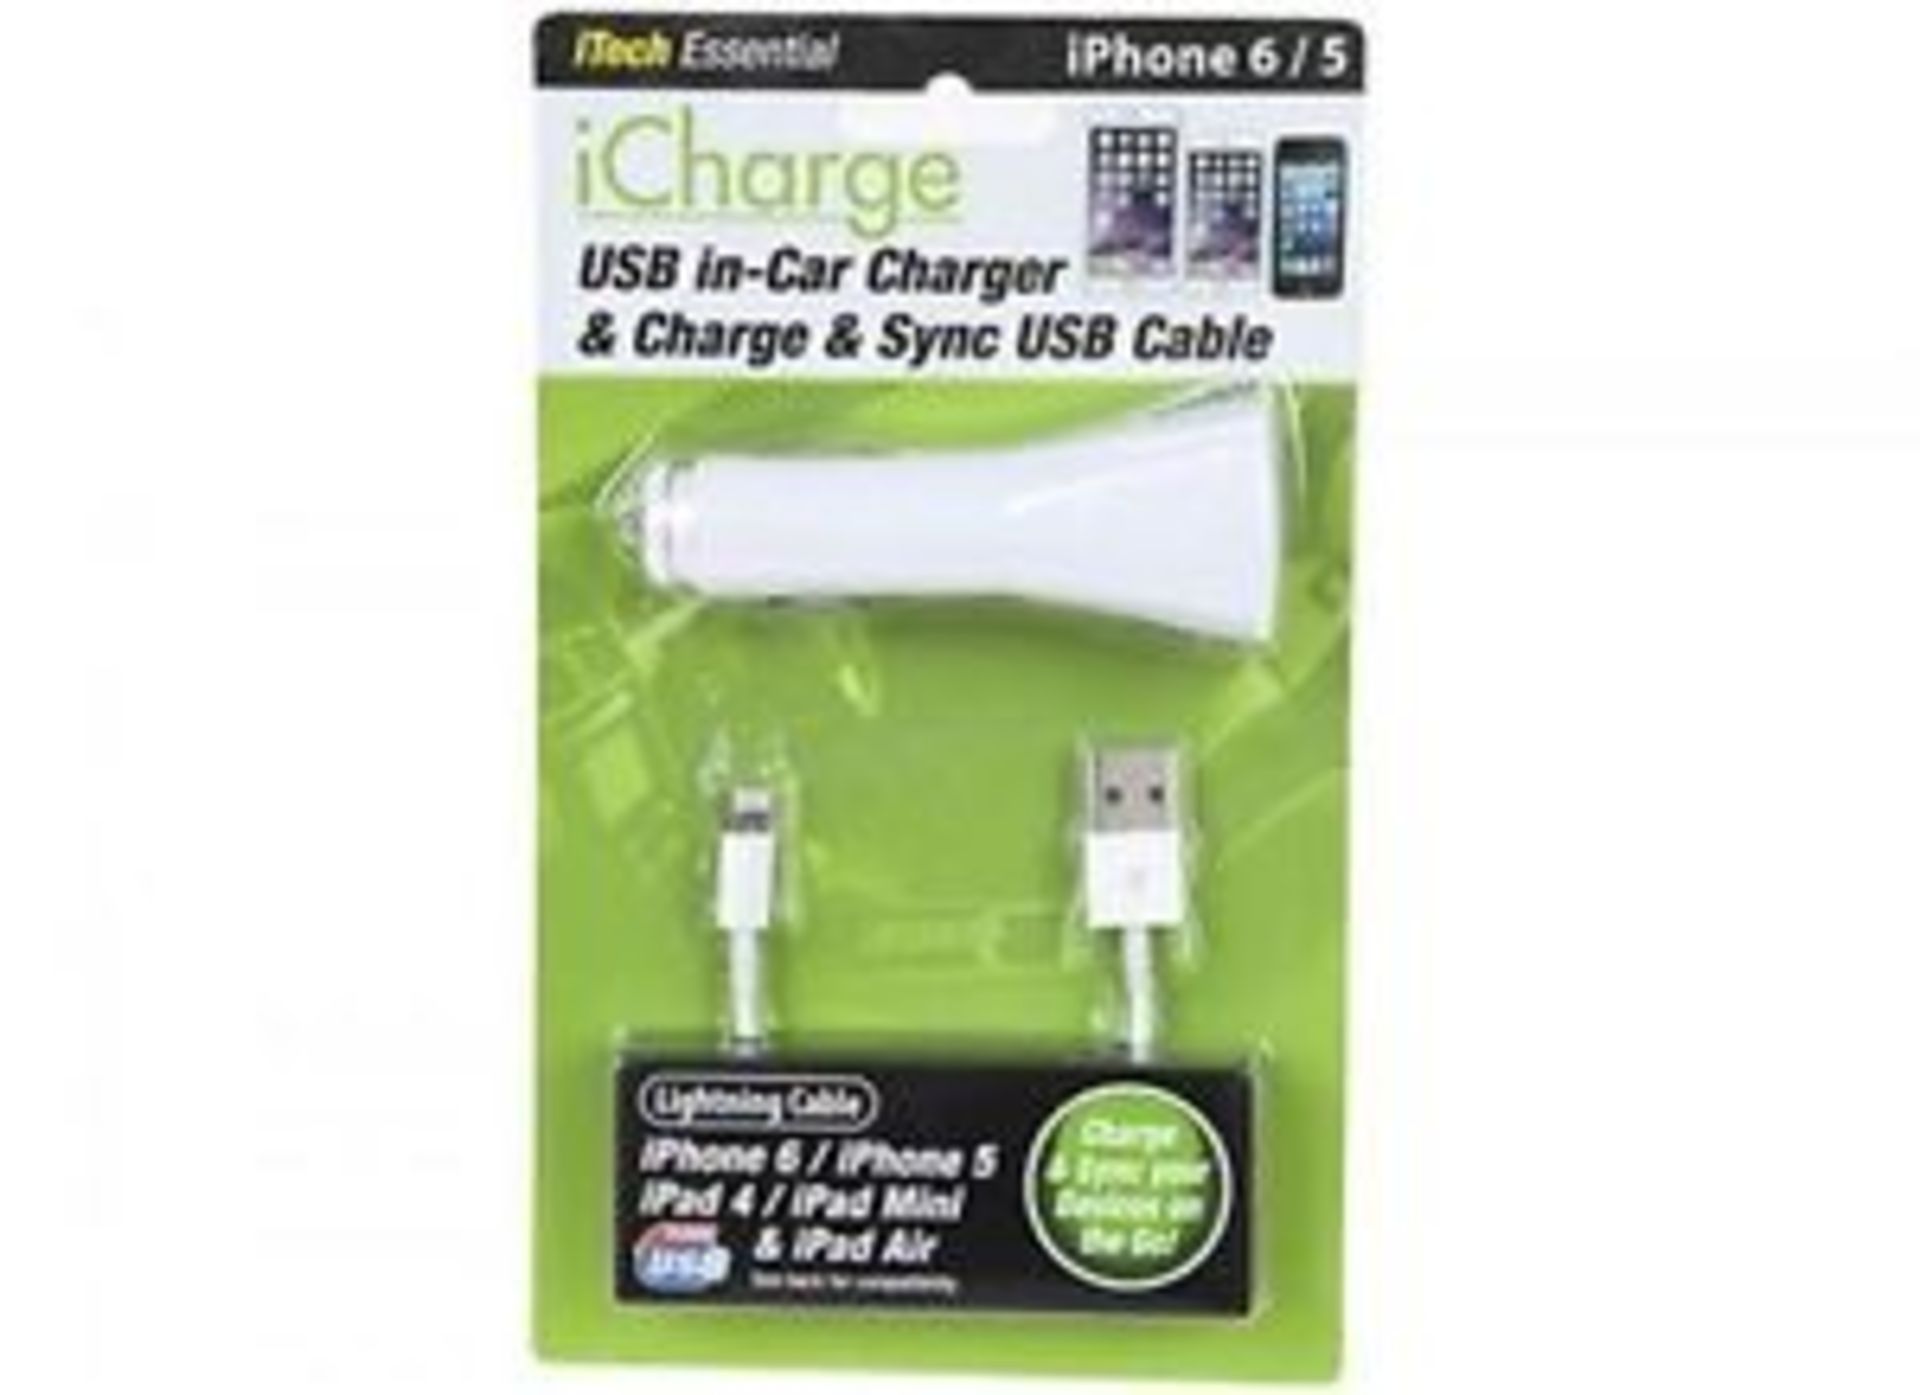 V Brand New JuiceBANK USB In car charger with lightening cable for iphone 5 and 6 X 2 Bid price to